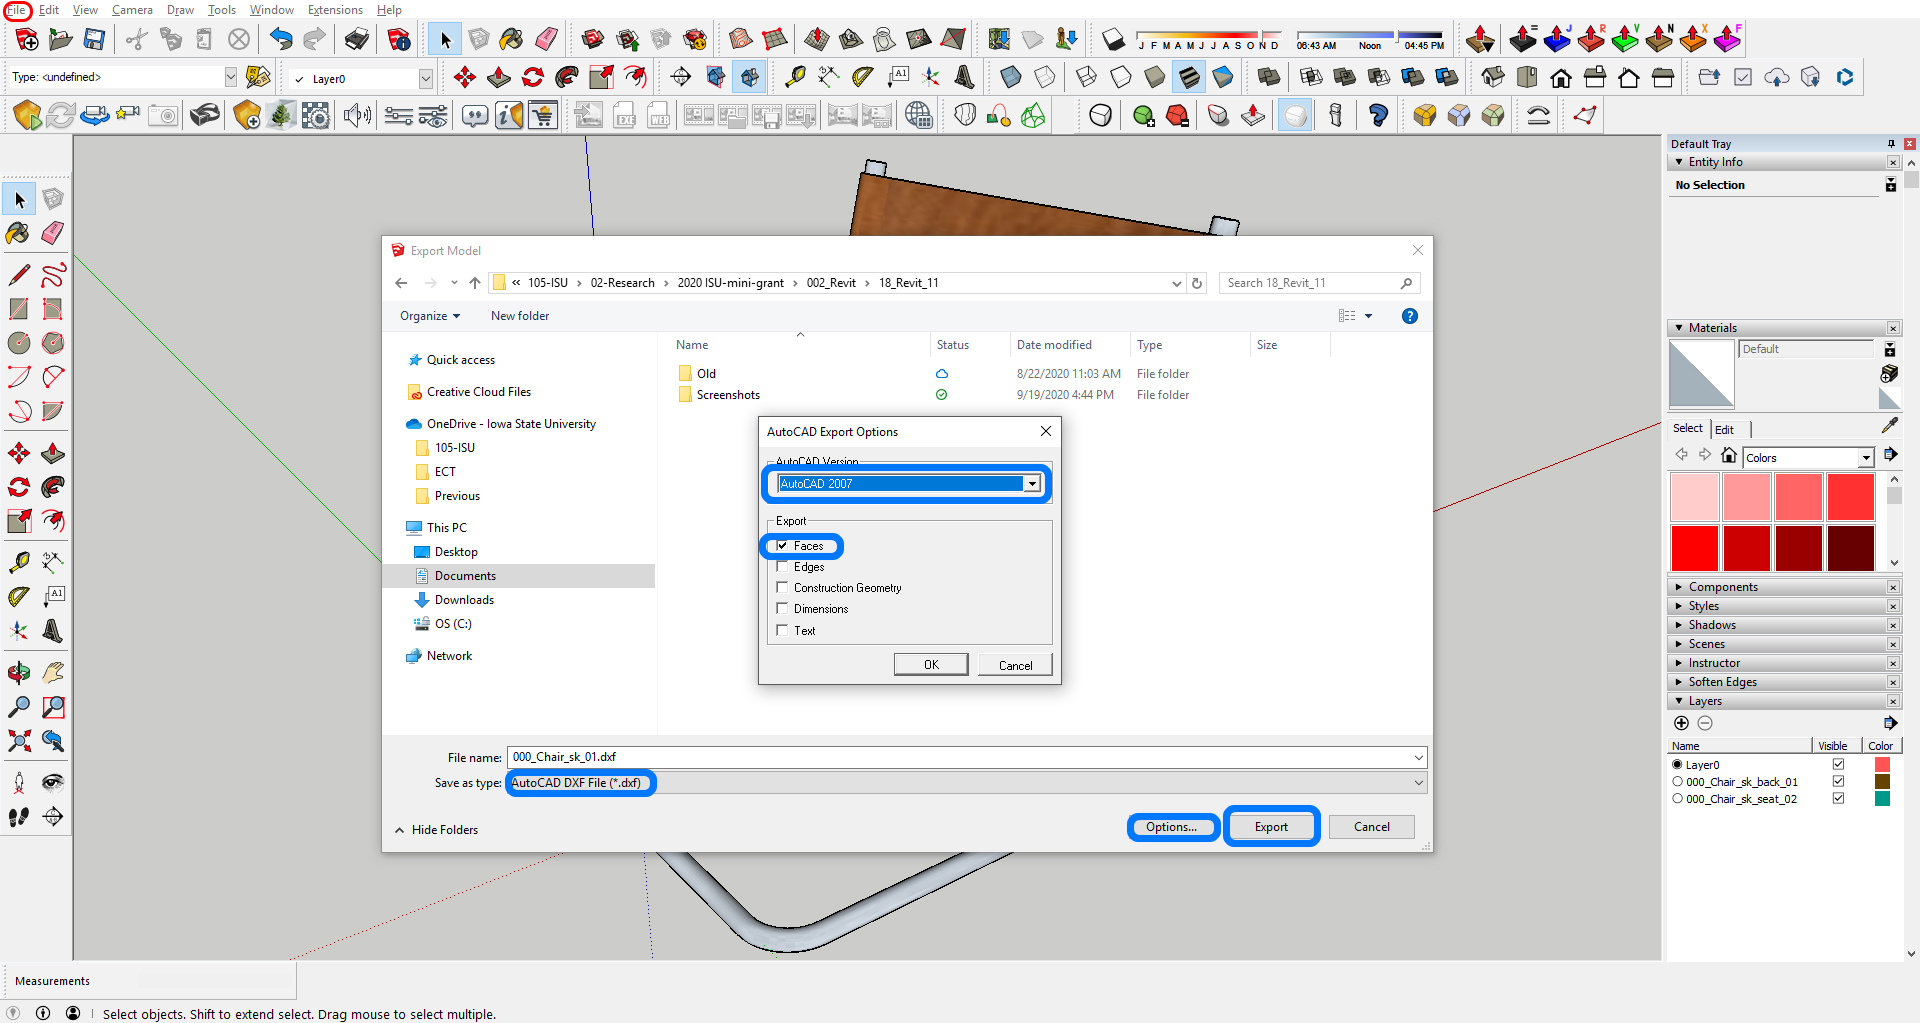 It indicates how to set dxf option to export the SketchUP model.